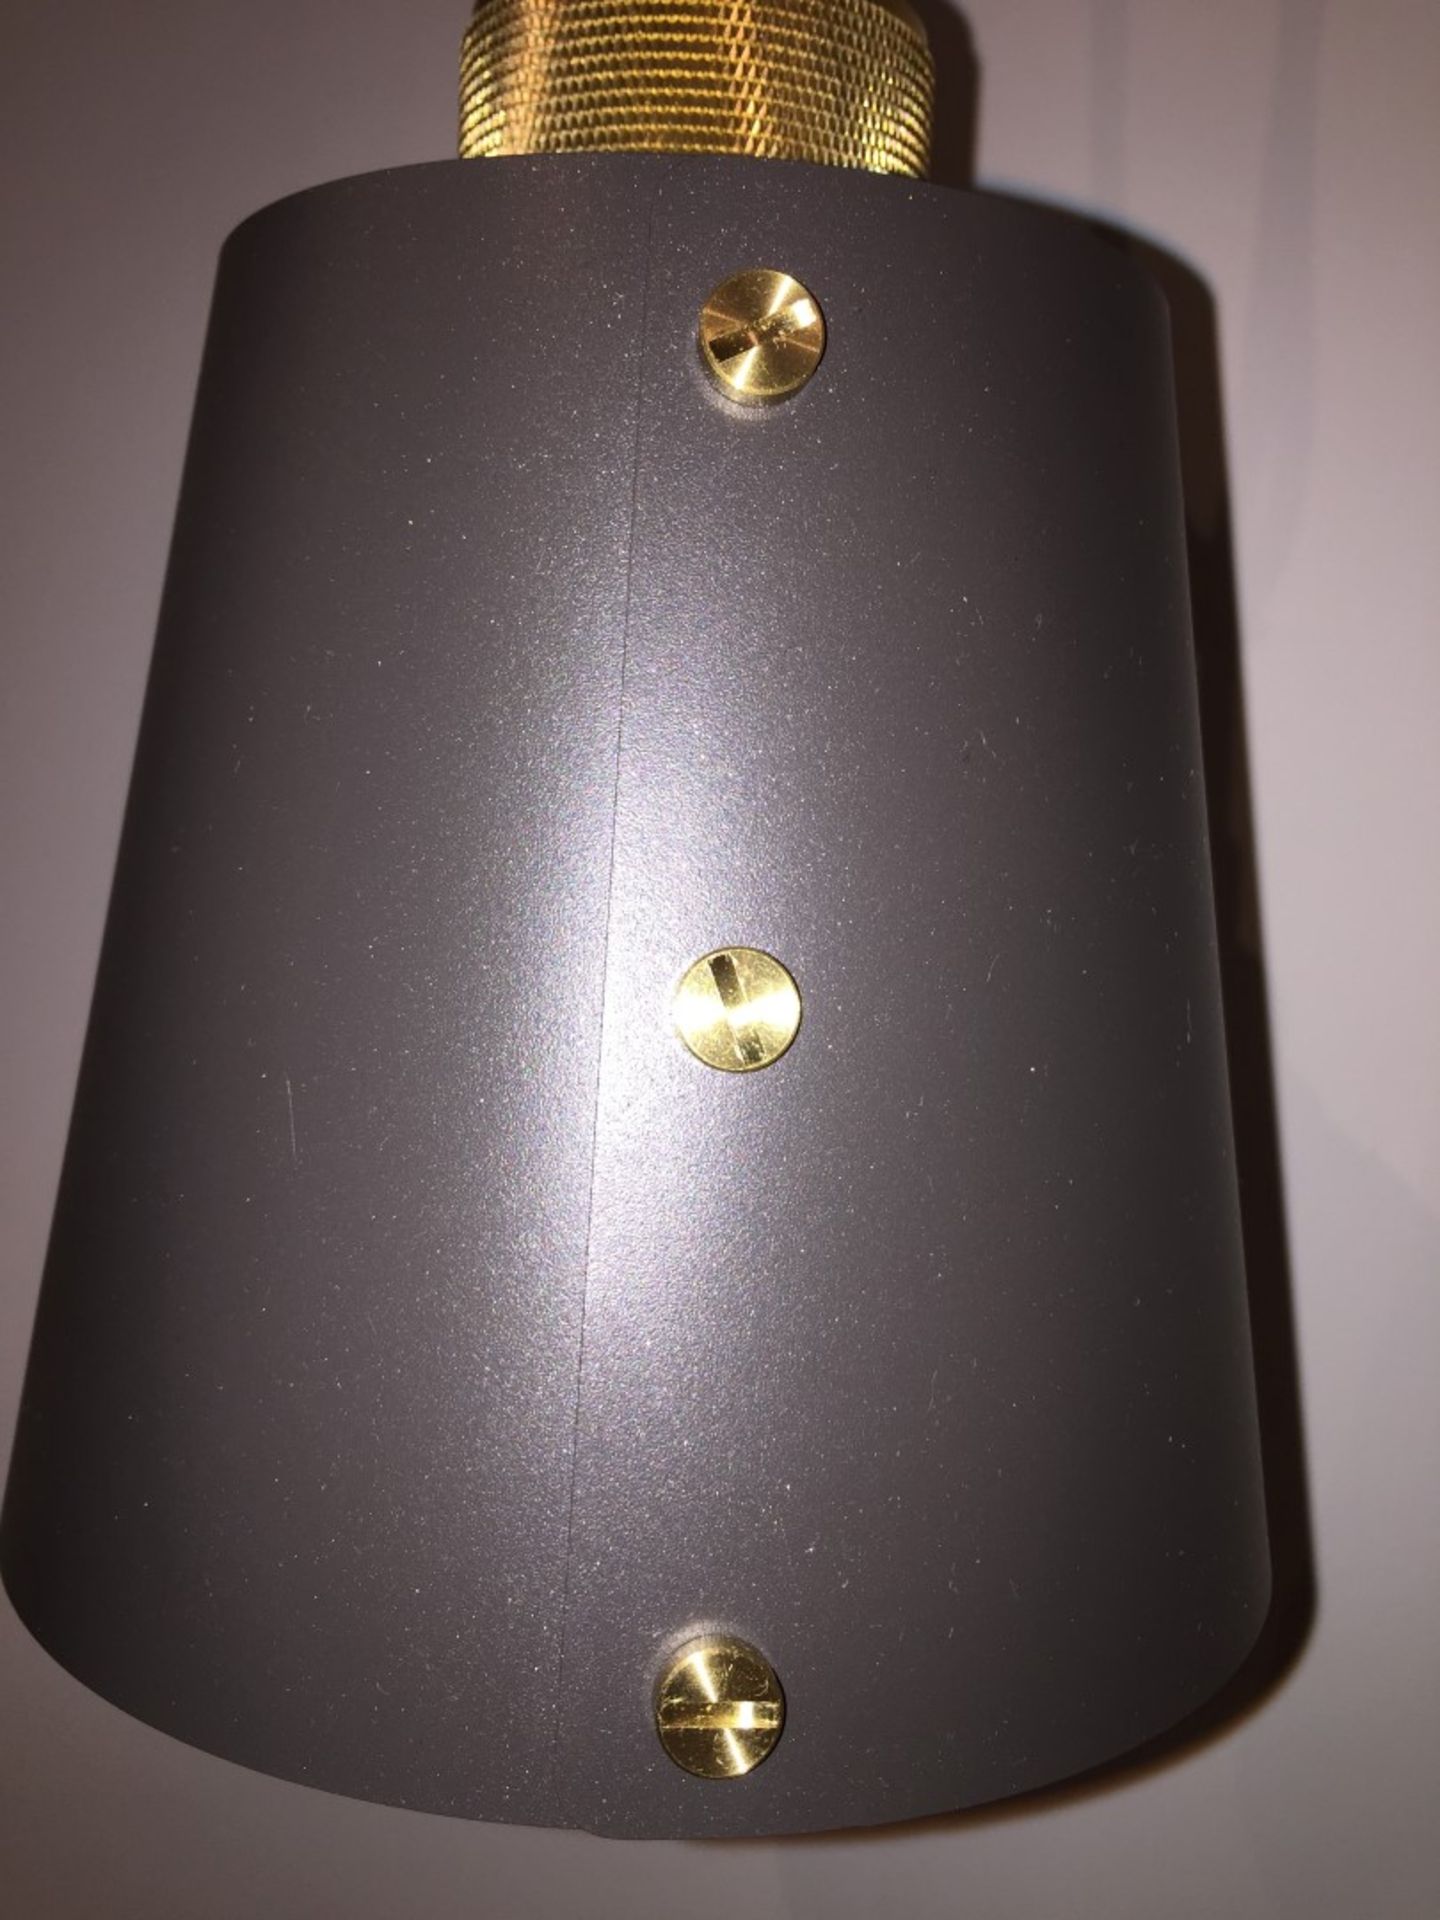 1 x BUSTER + PUNCH Hooked Wall Light With Metal Shade - Ref: WS/FF160B - CL204 - Location: London Ci - Image 9 of 11